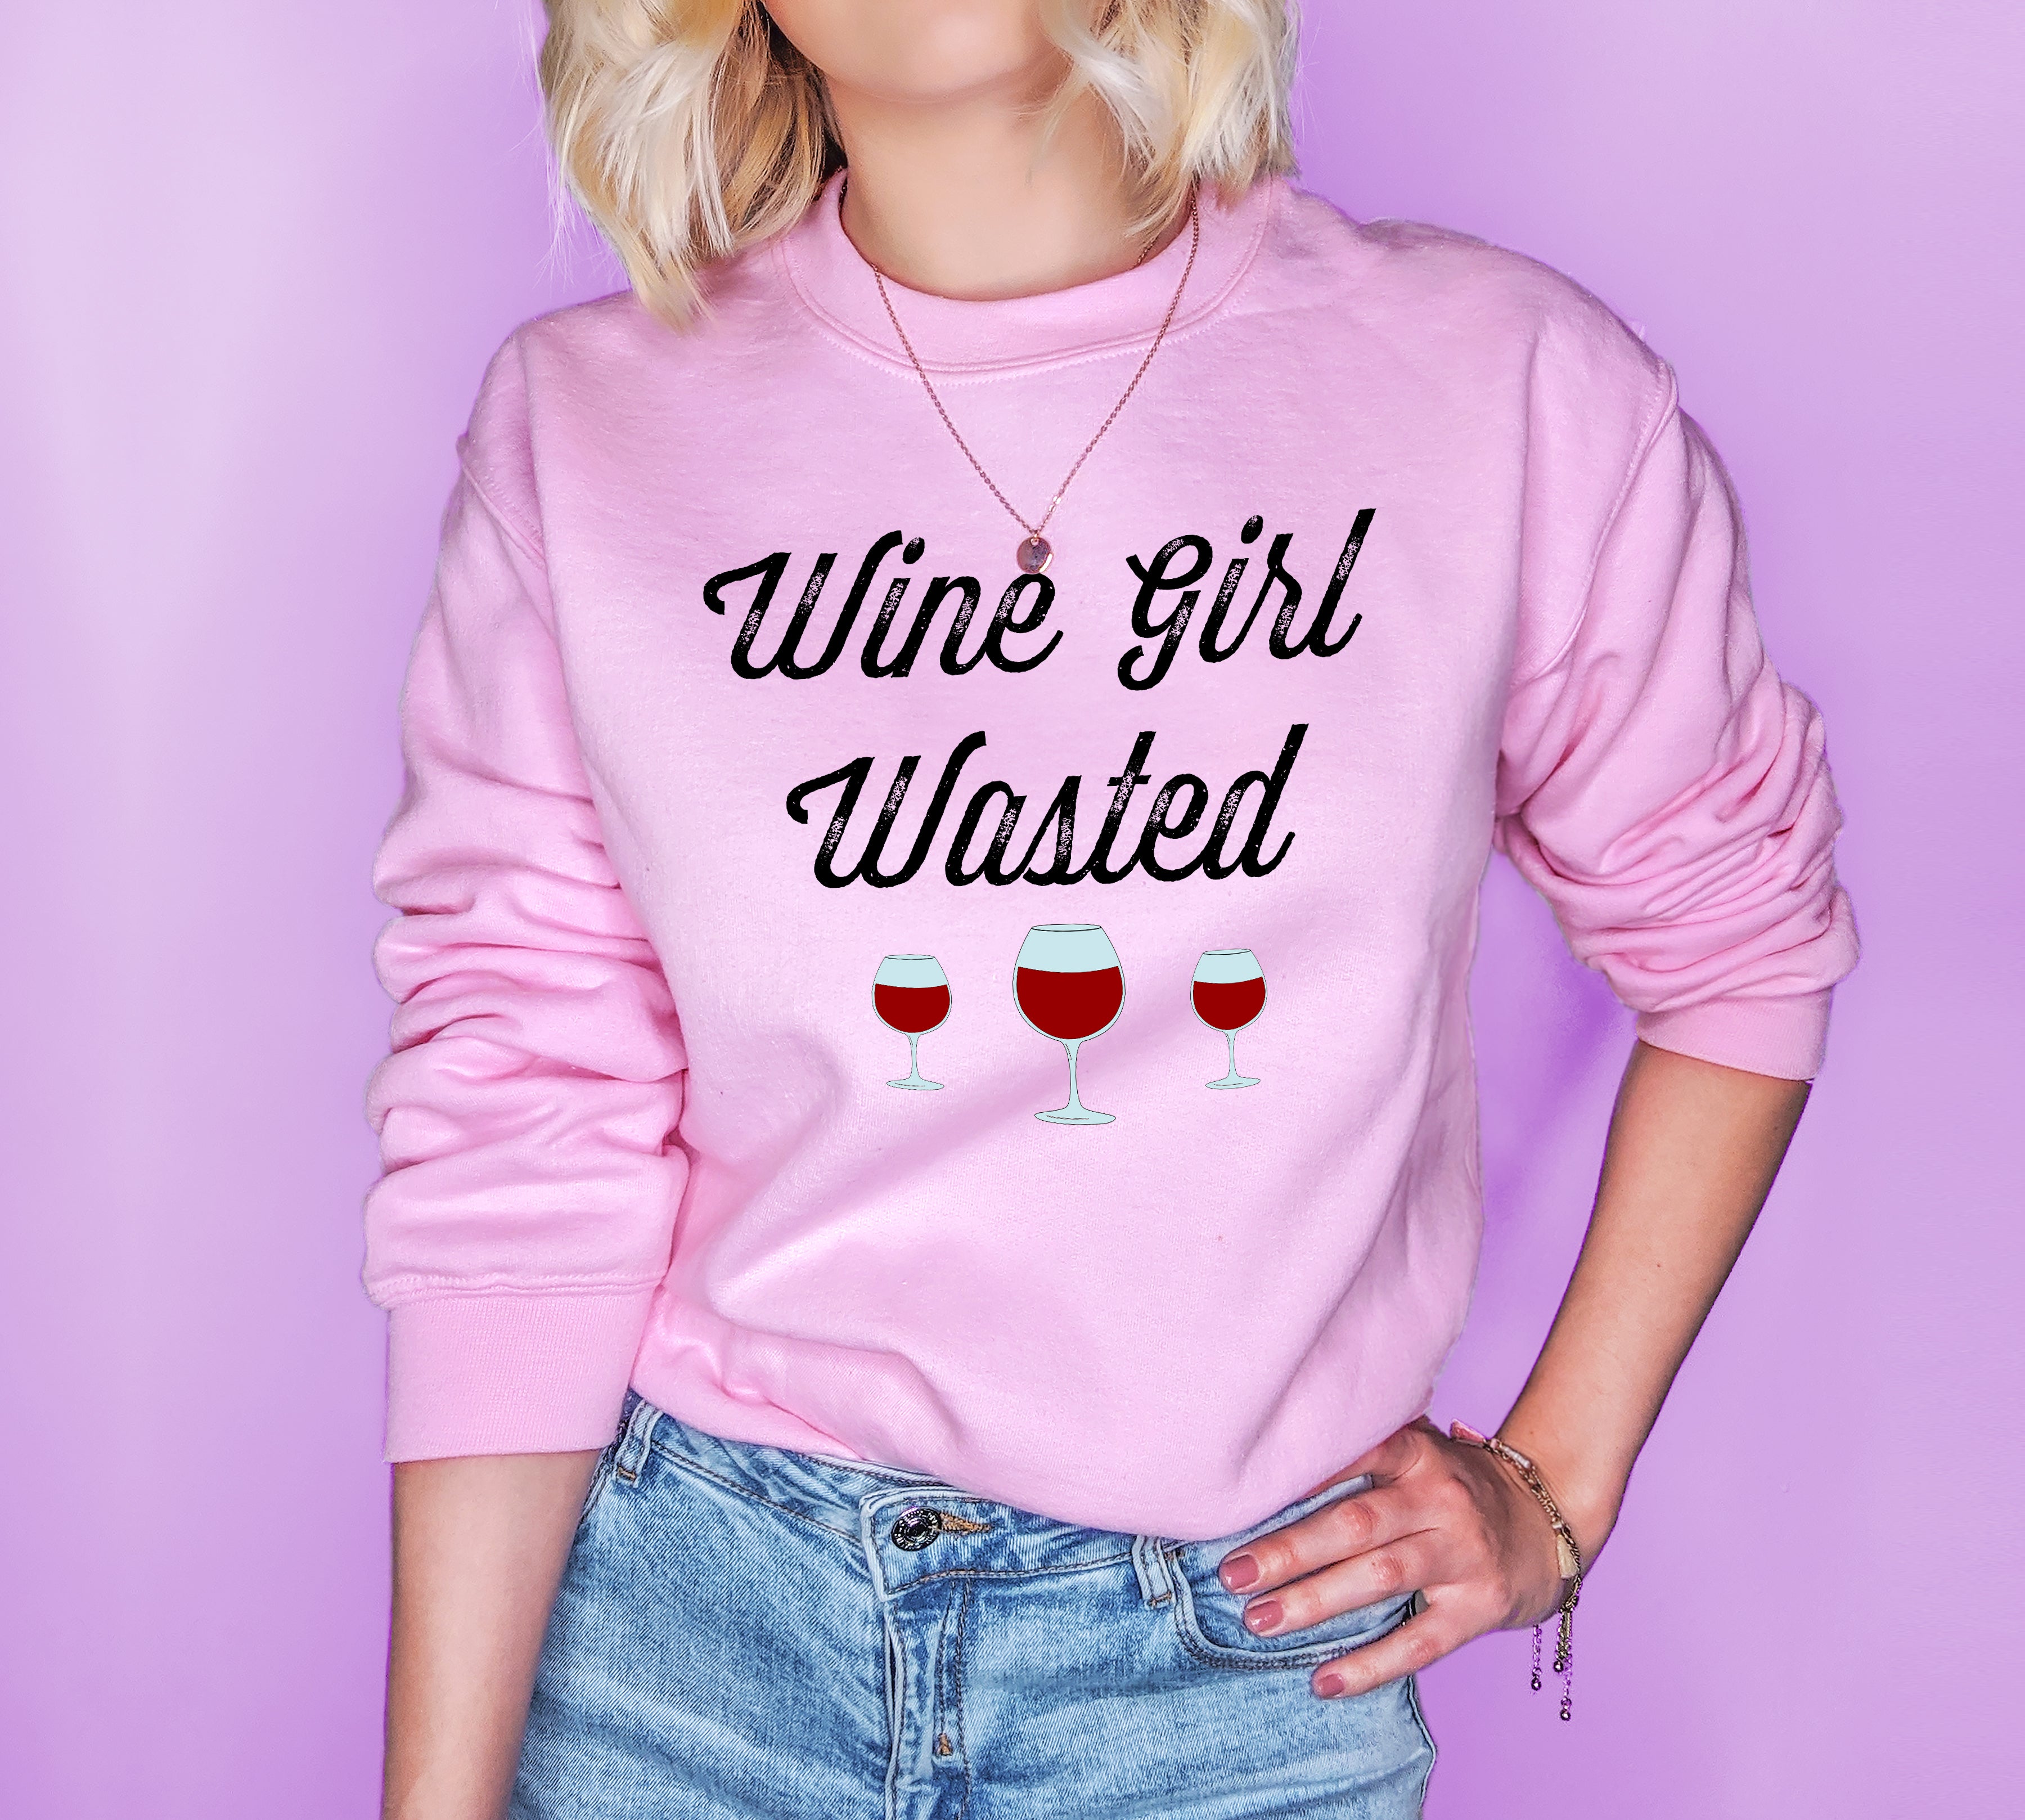 Pink sweatshirt with wine glasses that says wine girl wasted - HighCiti